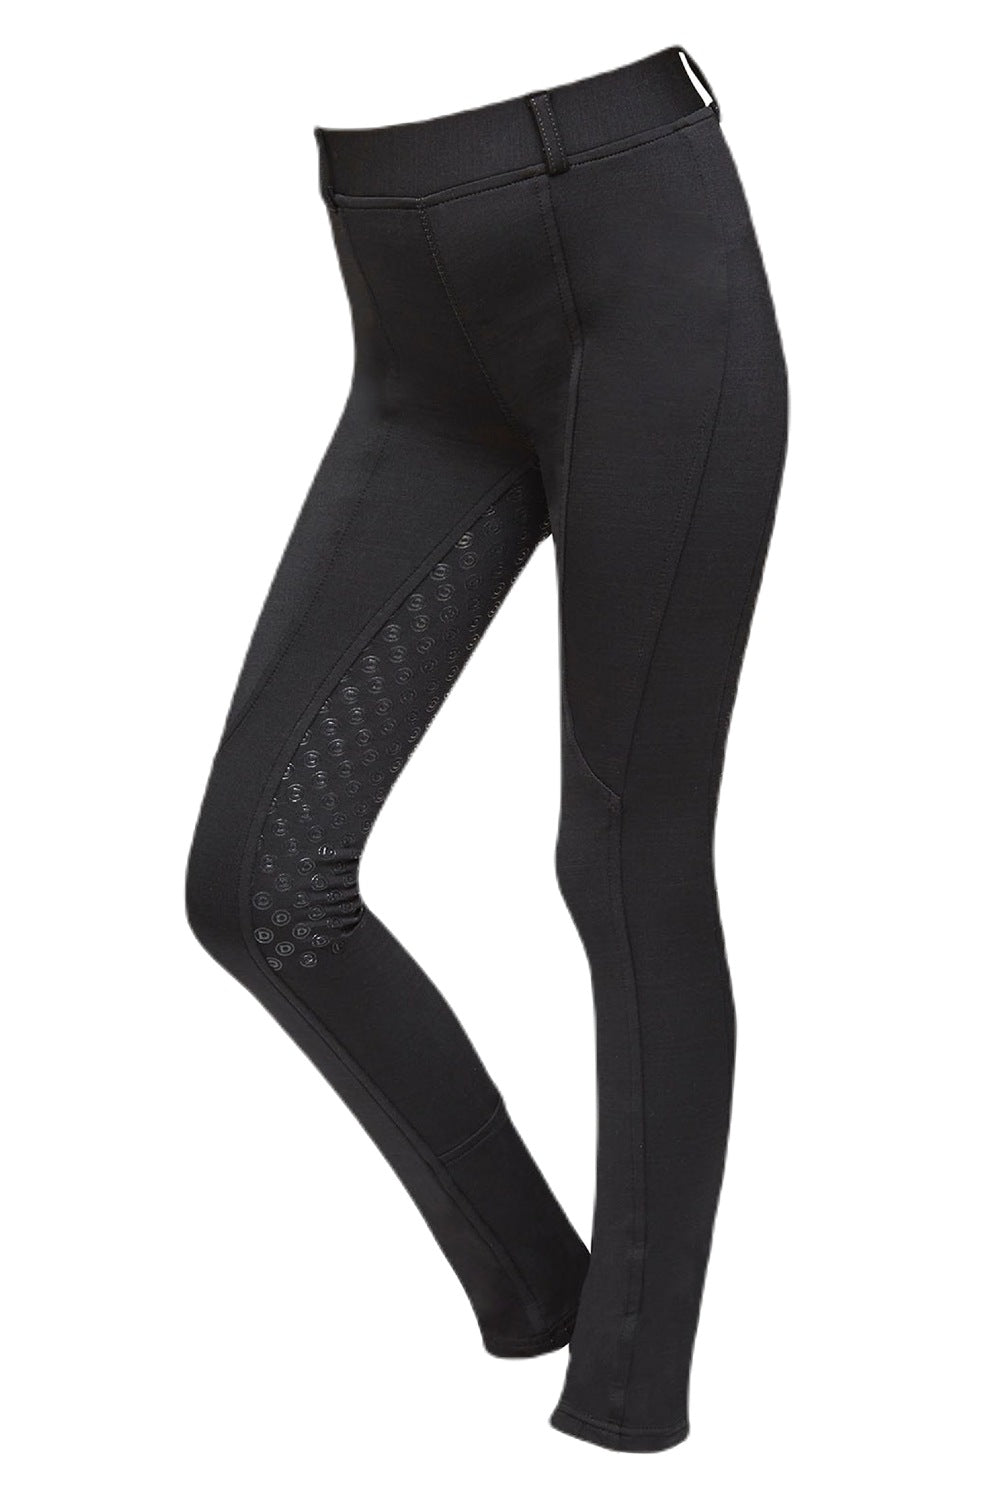 Dublin Childrens Performance Cool-It Gel Riding Tights